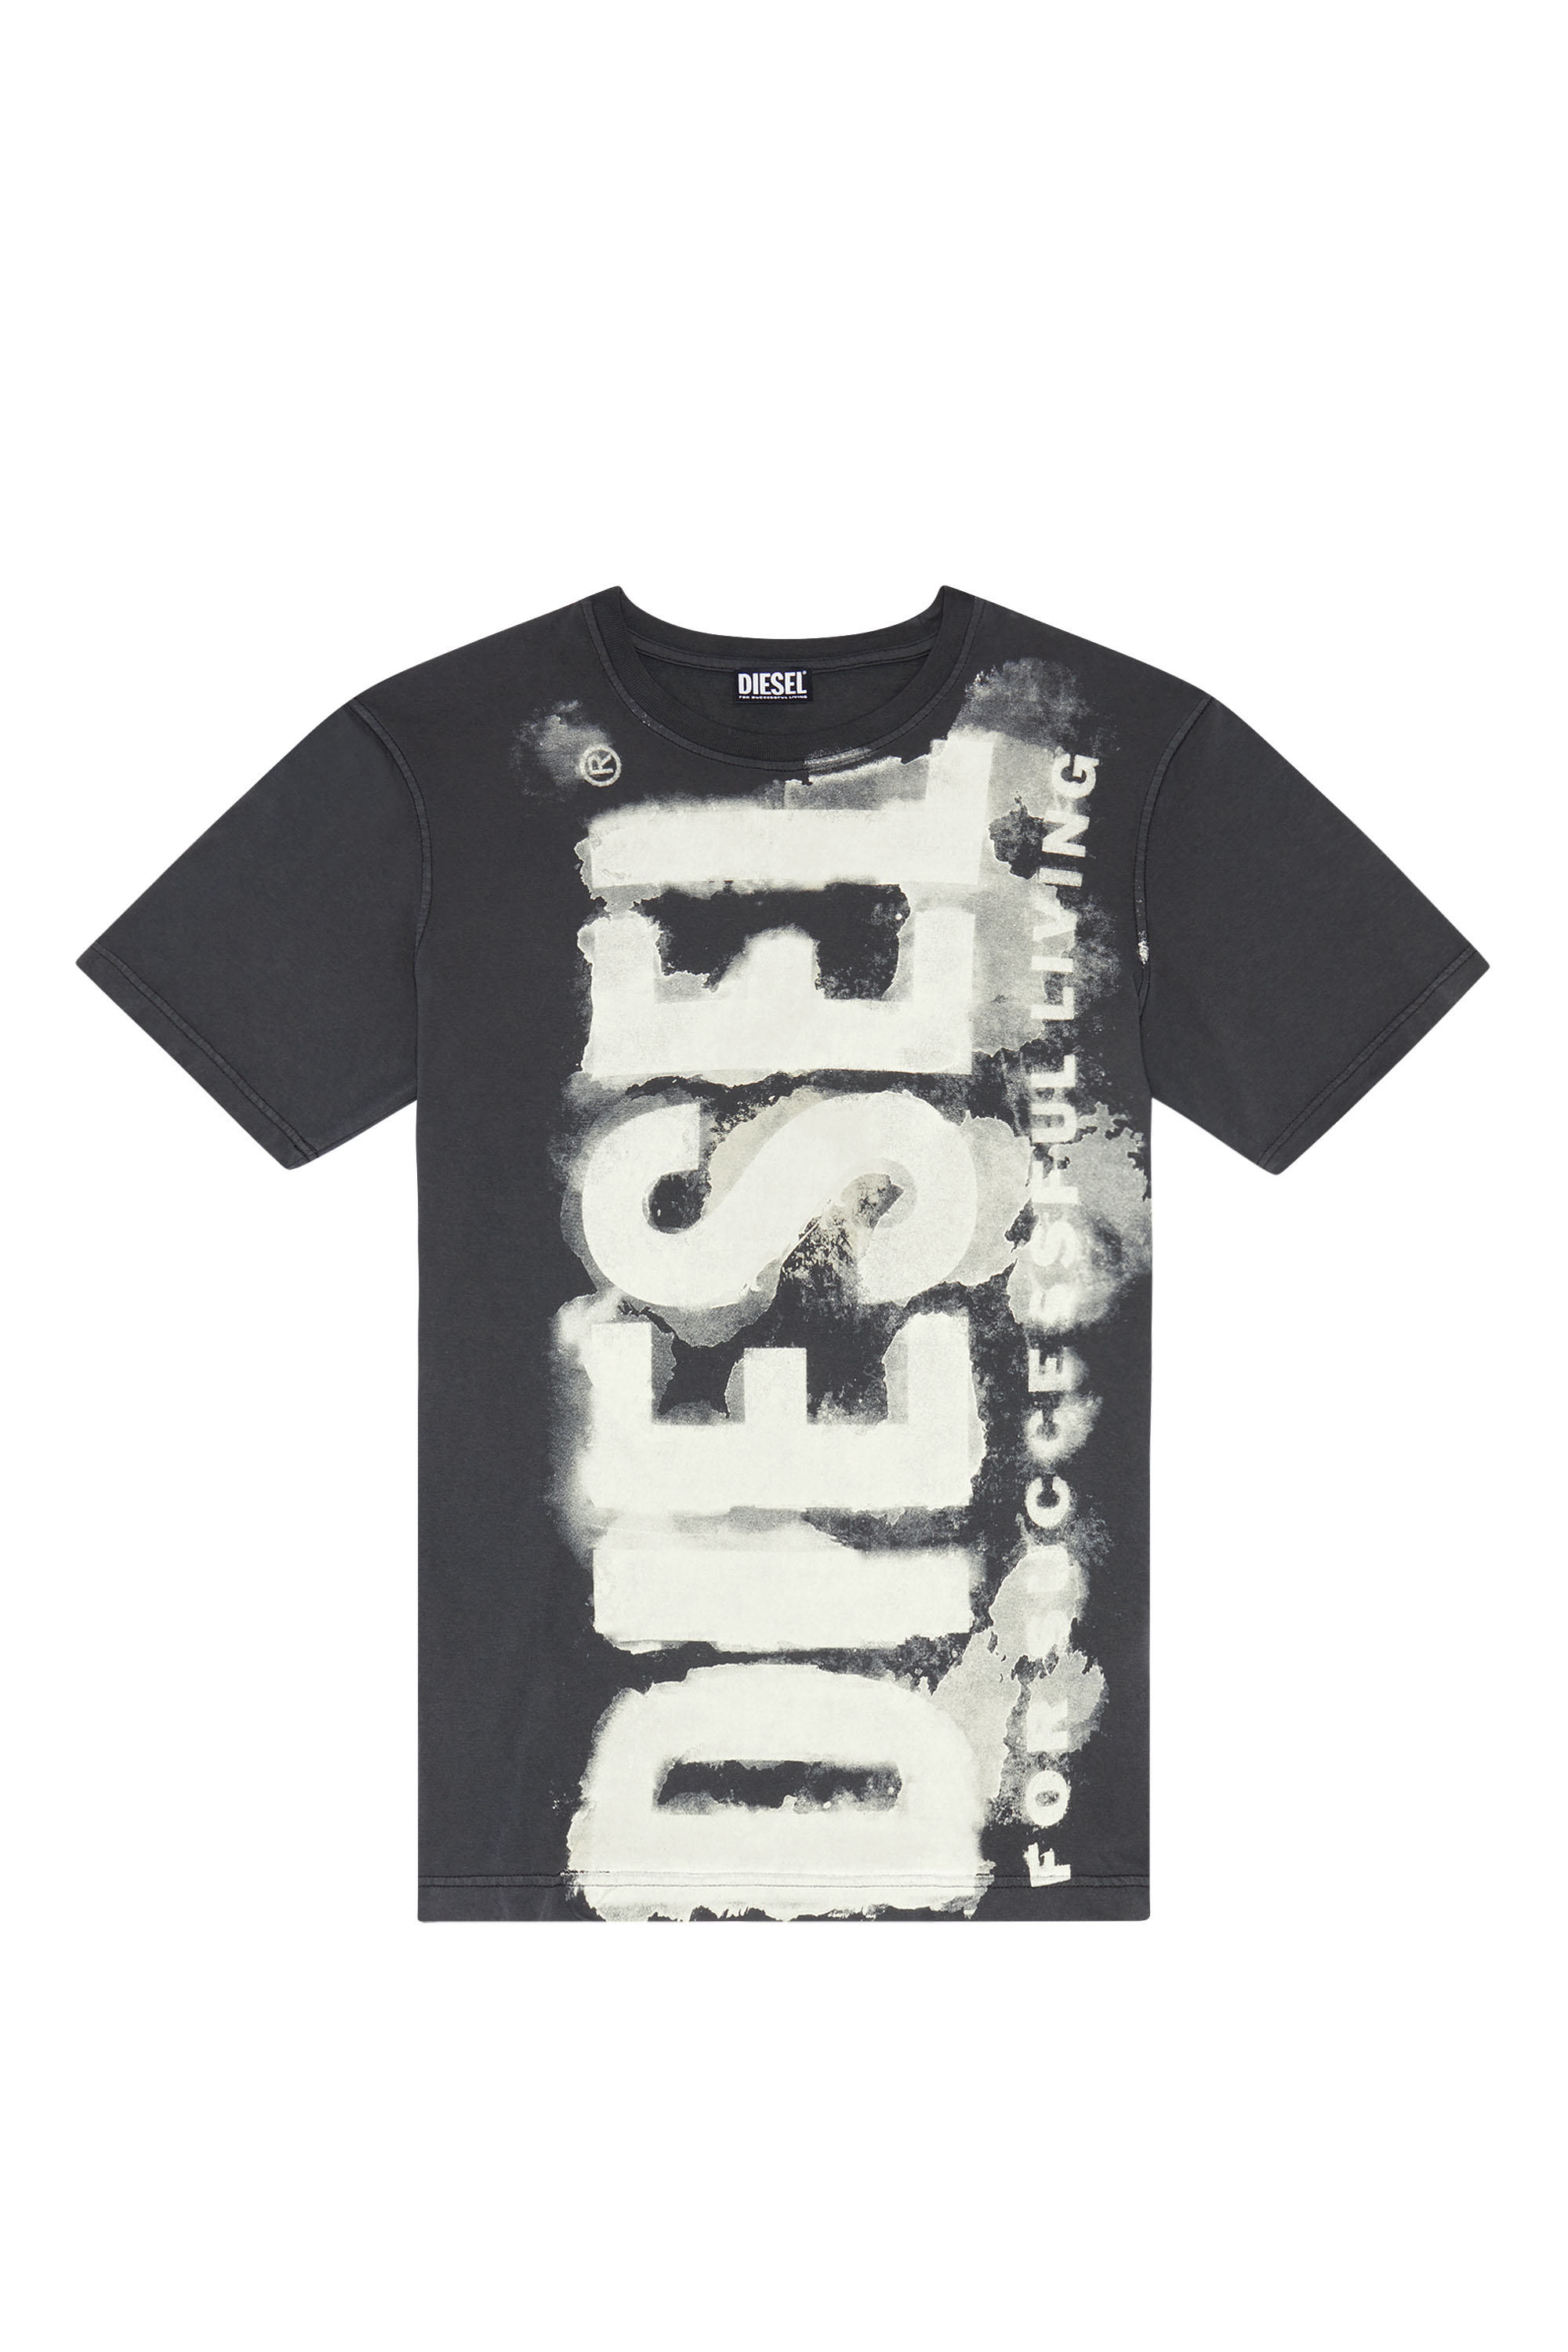 Diesel - T-JUST-E16, Gris oscuro - Image 1